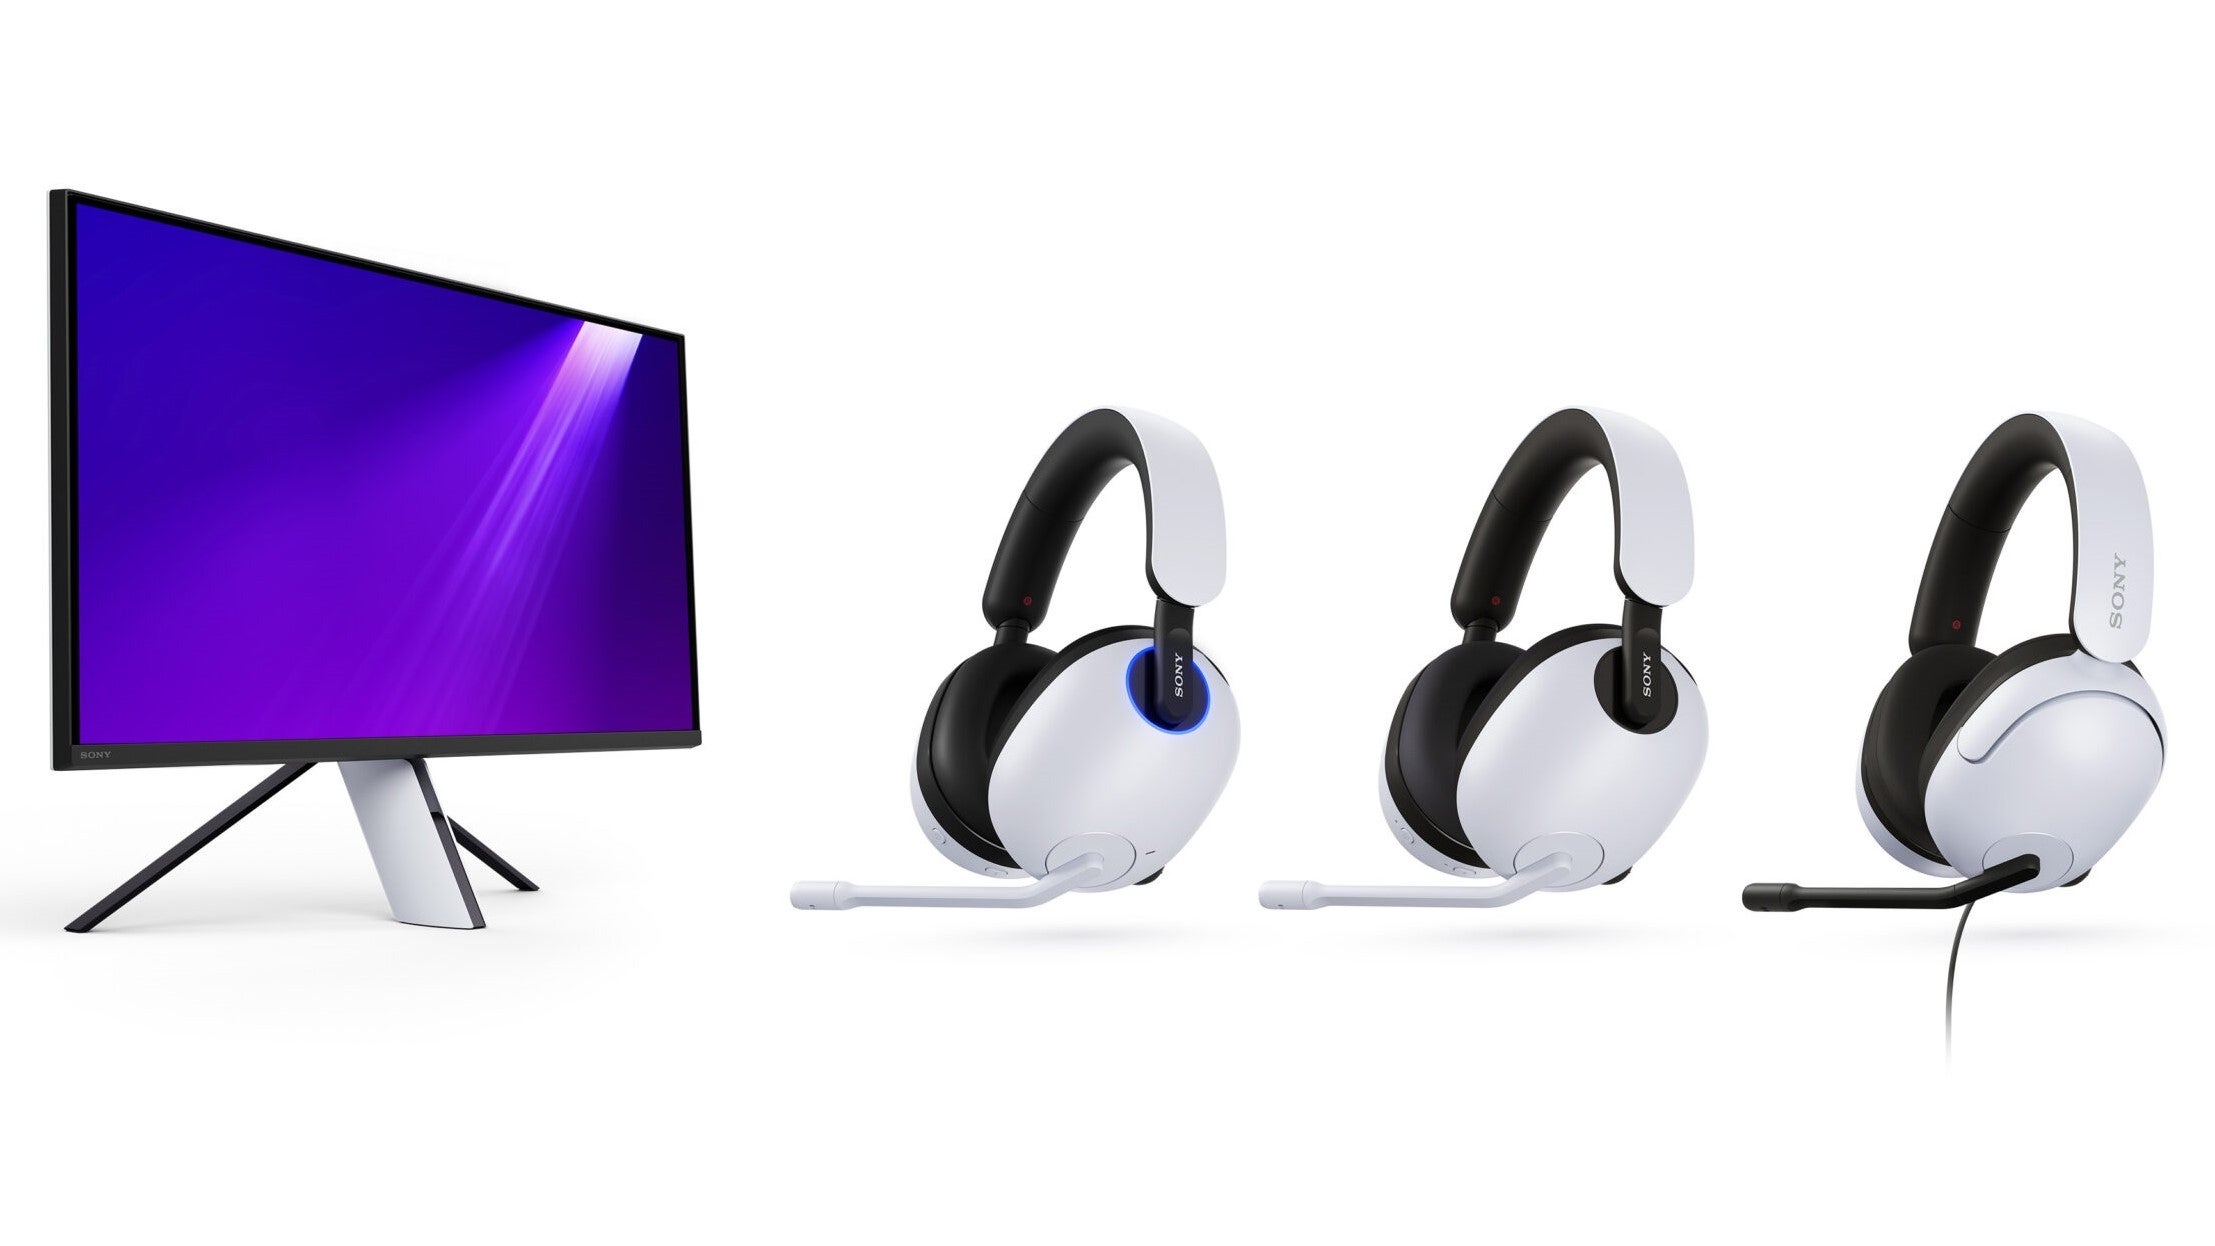 The Sony InZone M9 gaming monitor and all three InZone H series headsets against a white background.